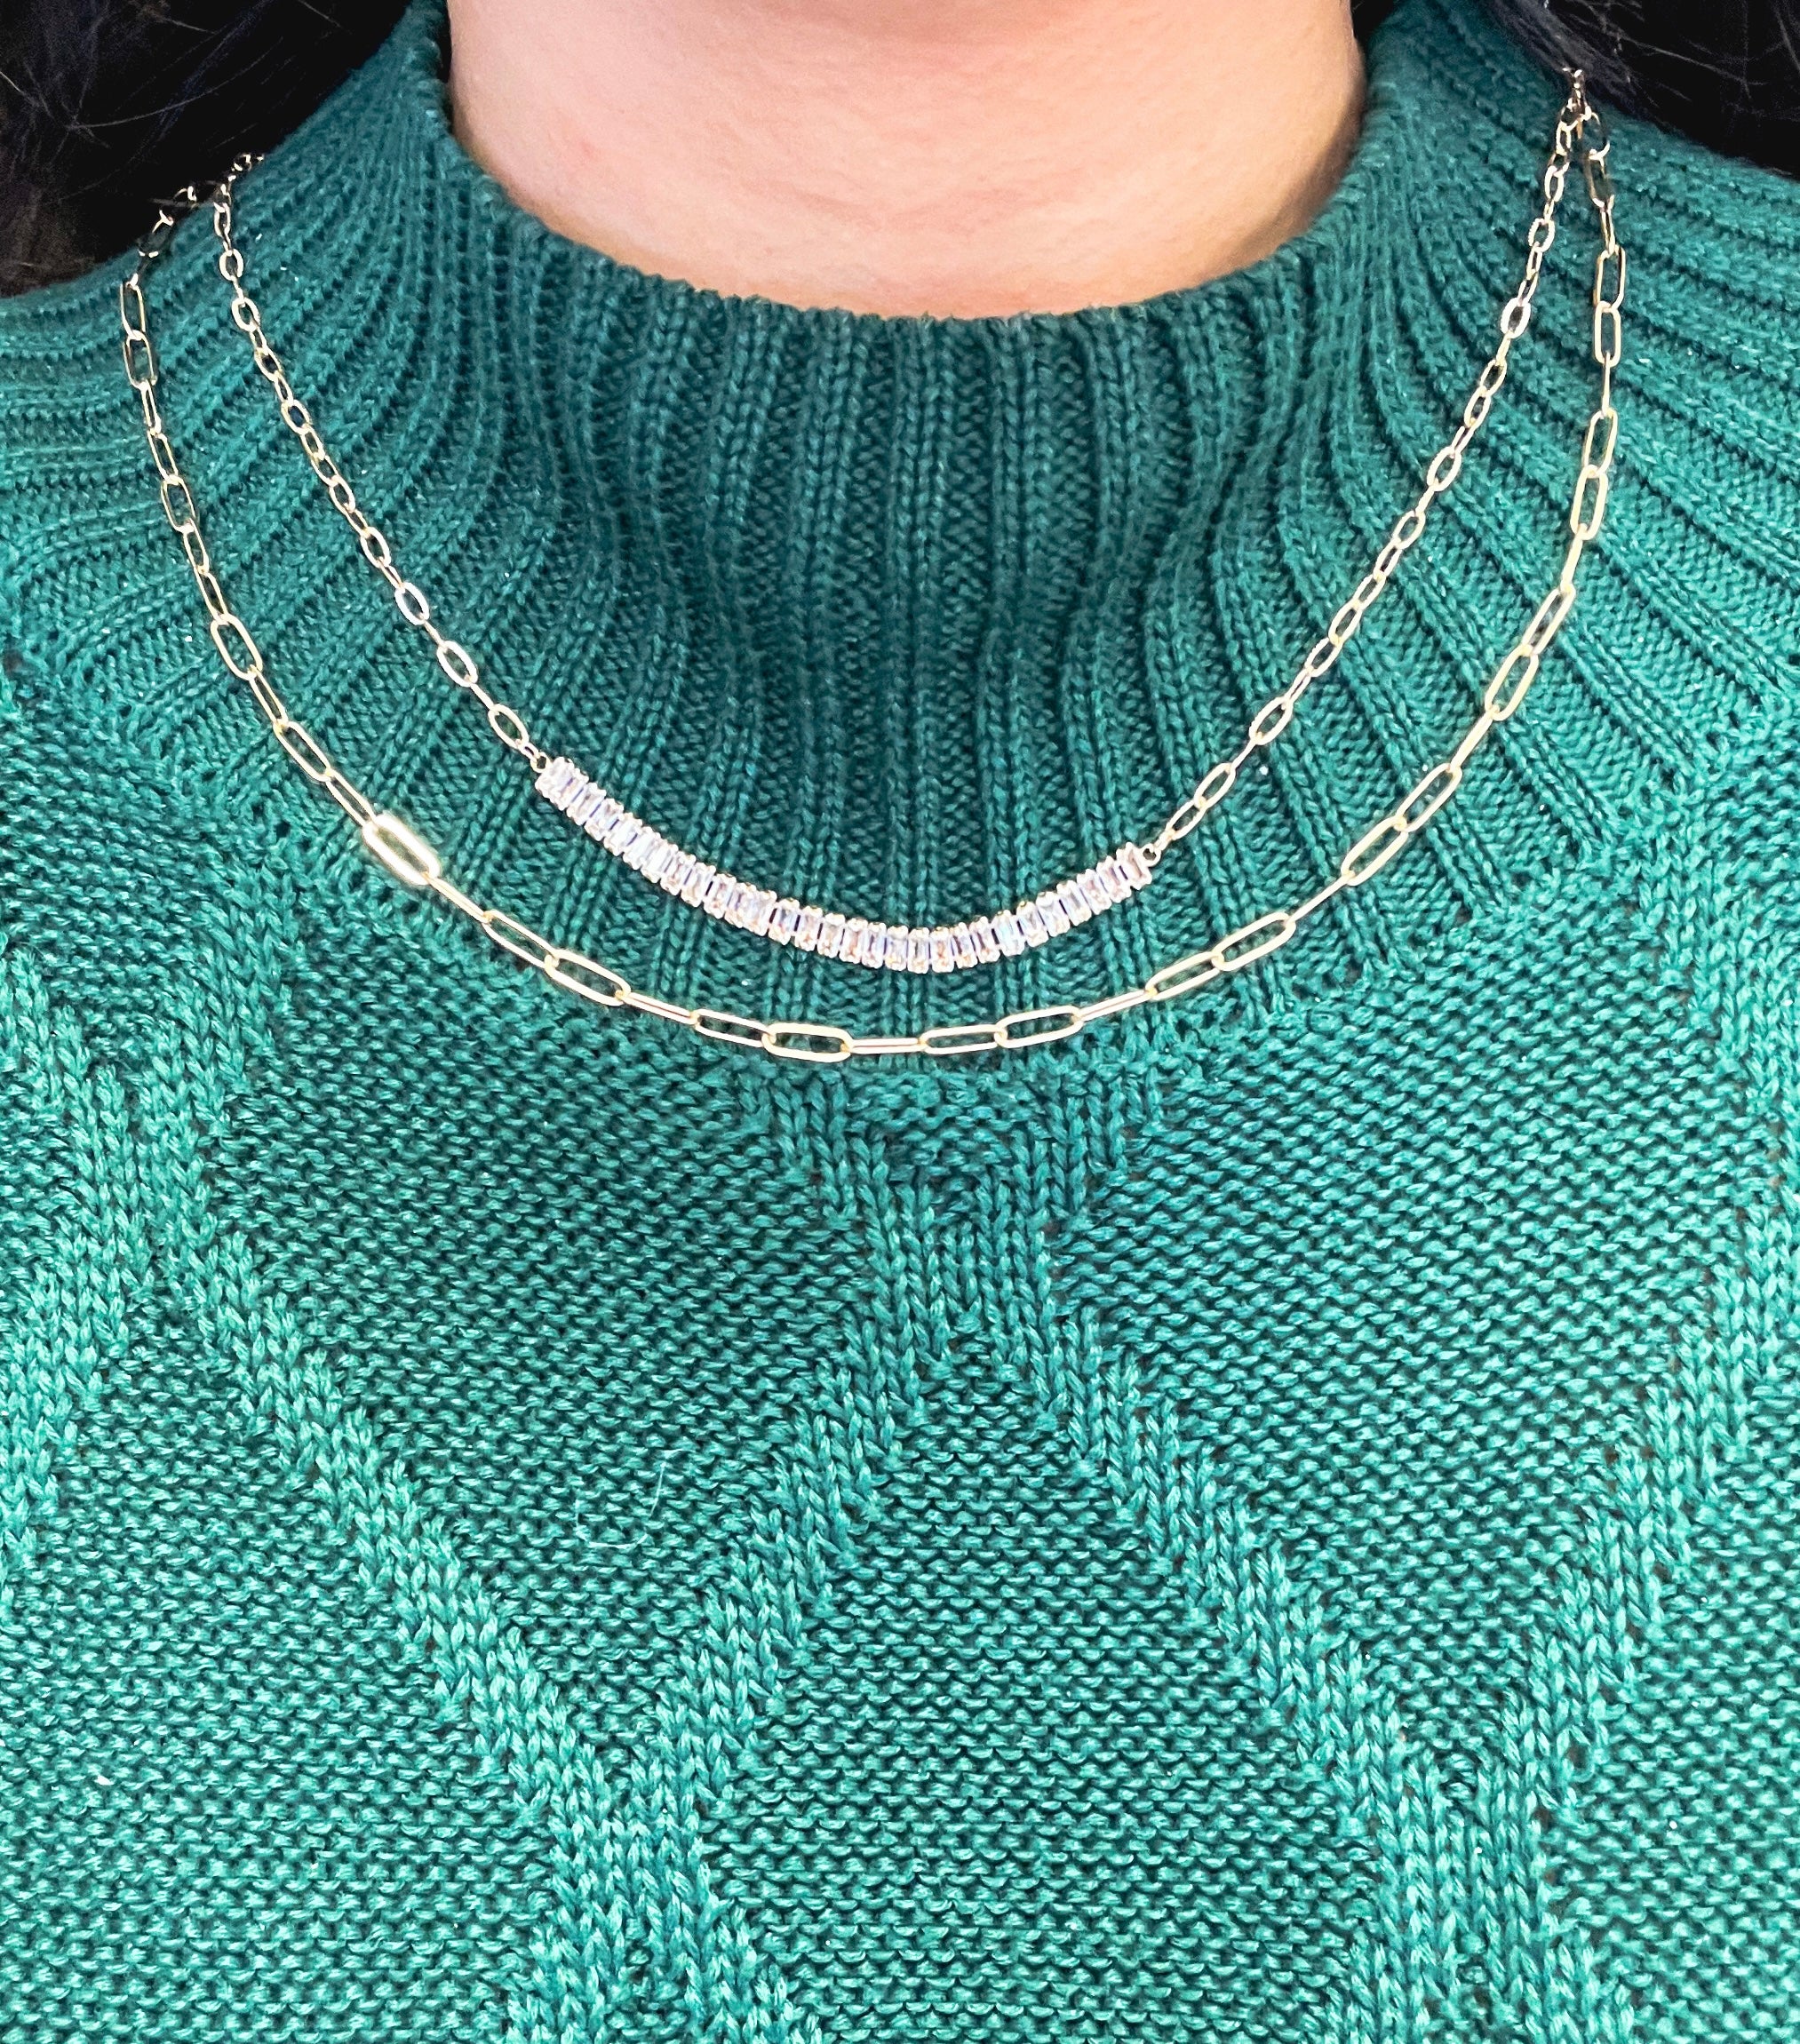 She's Got Layers Necklace